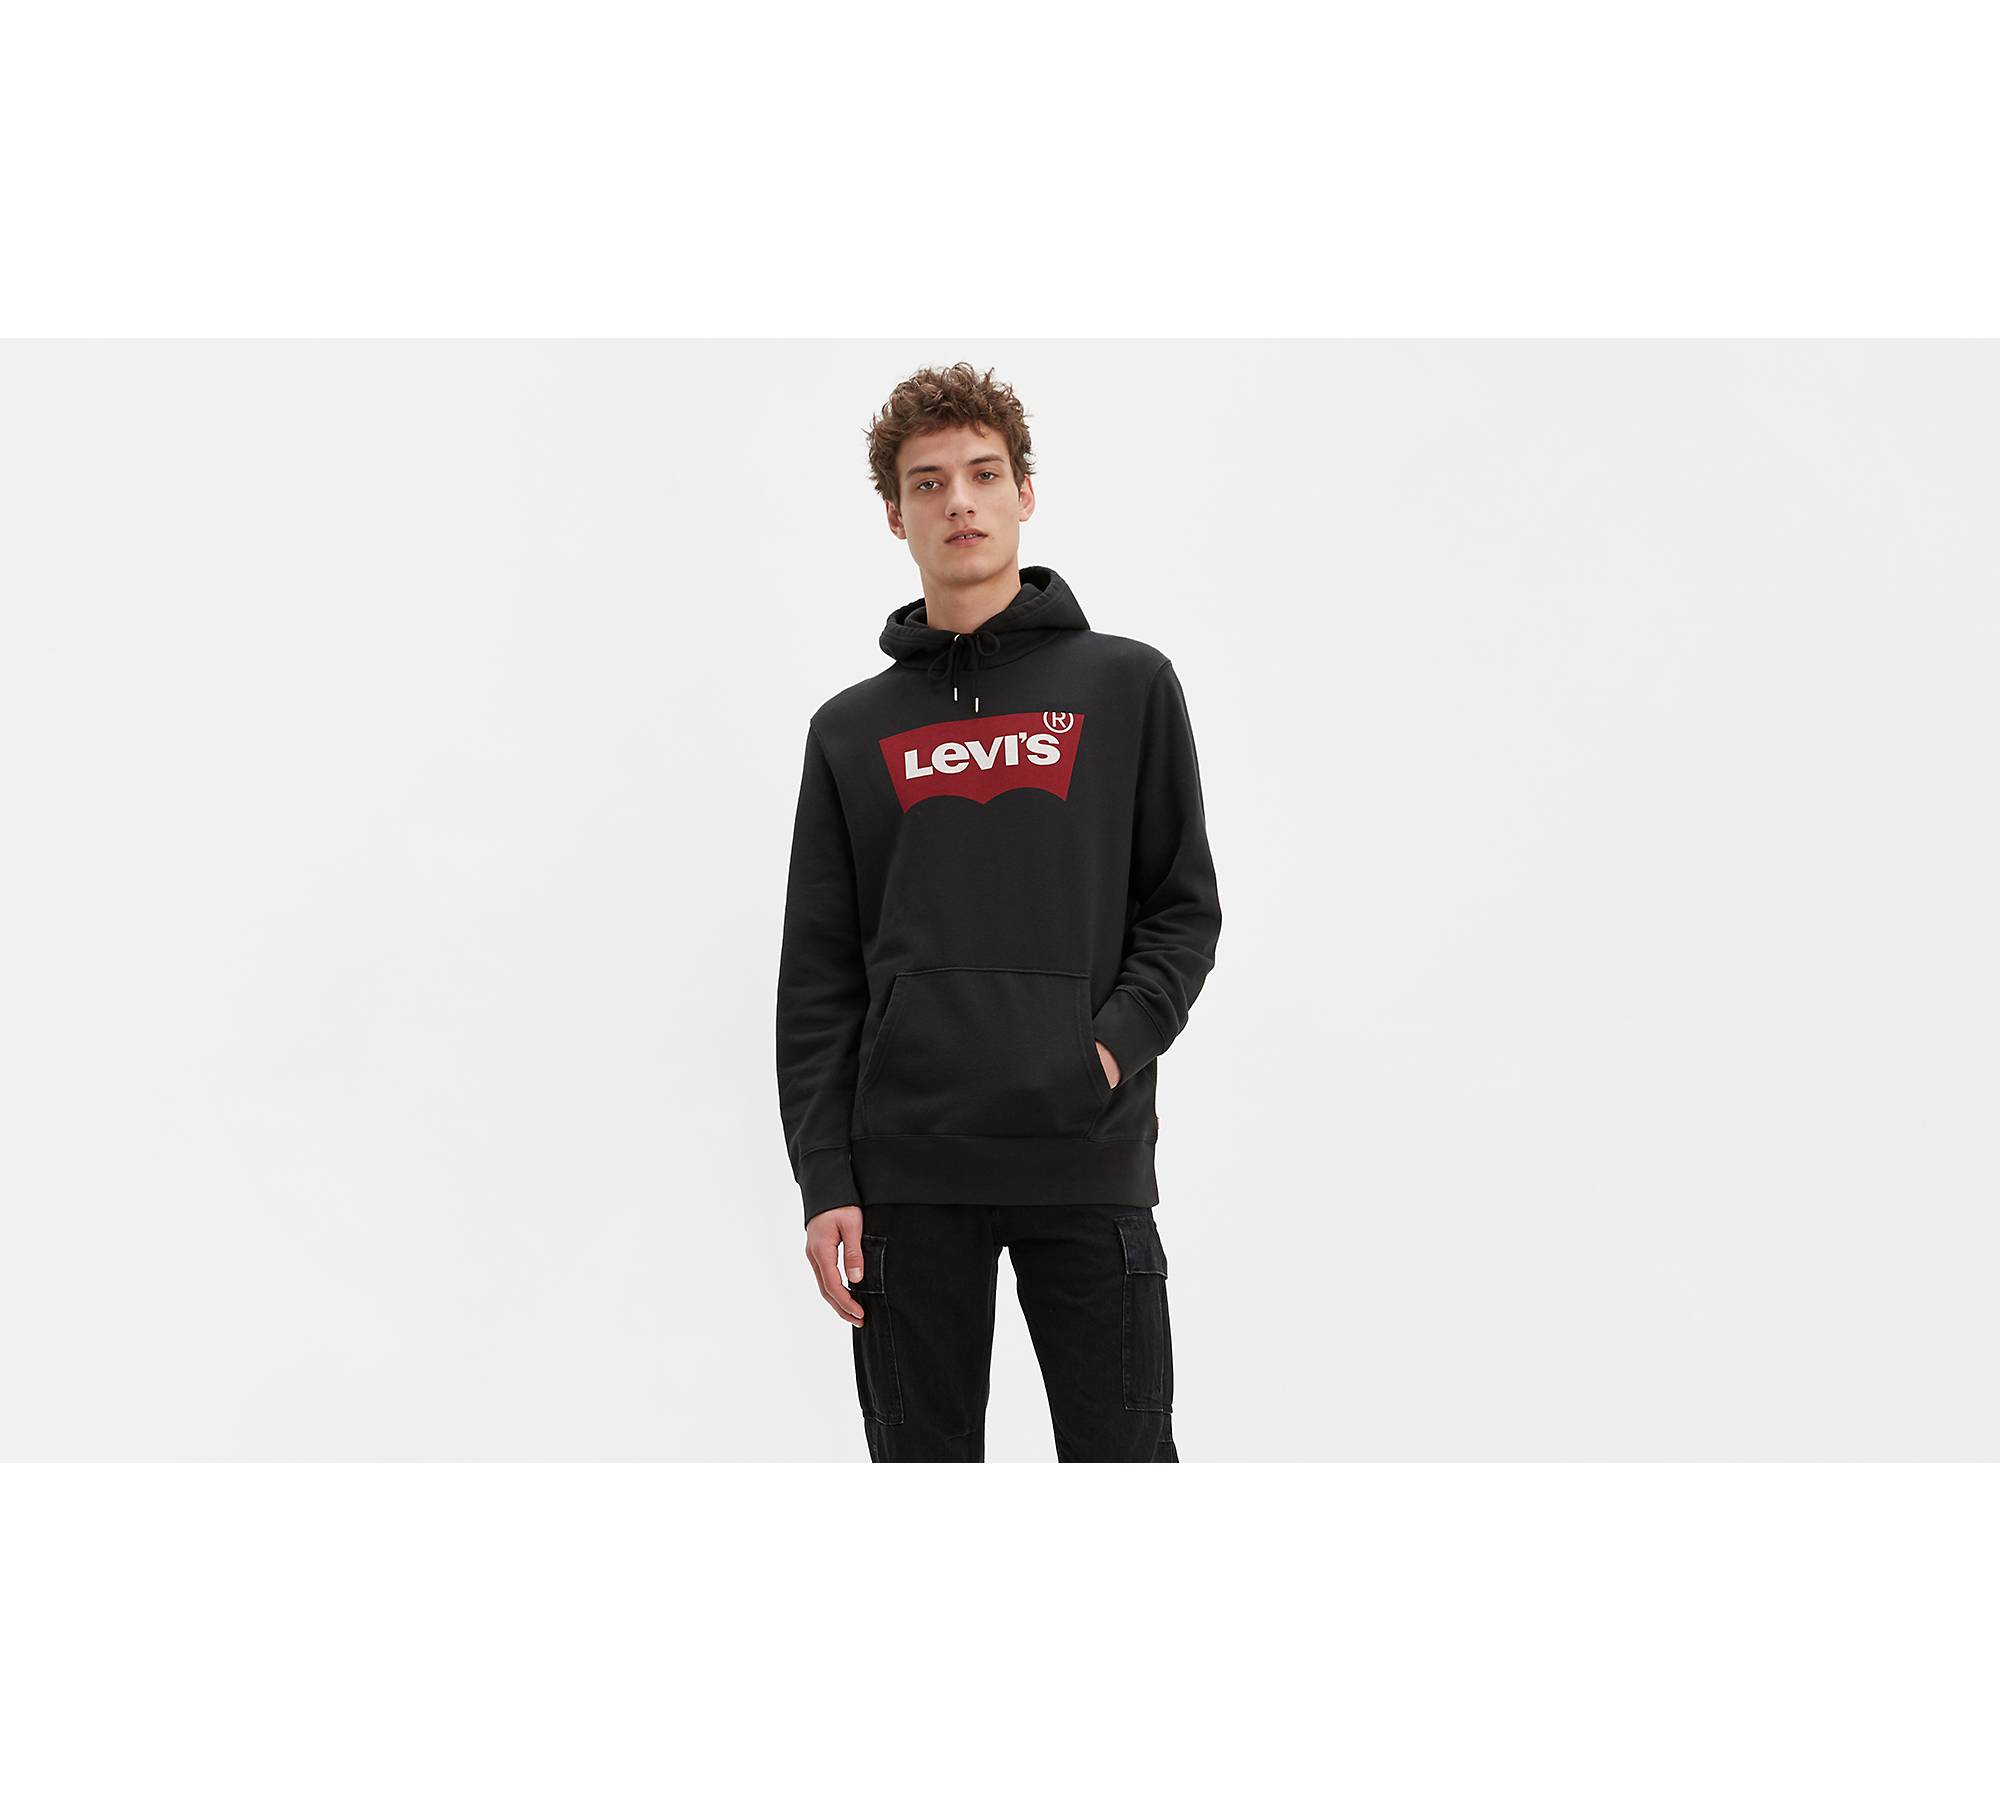 Levi's® Logo Pullover Hoodie 1